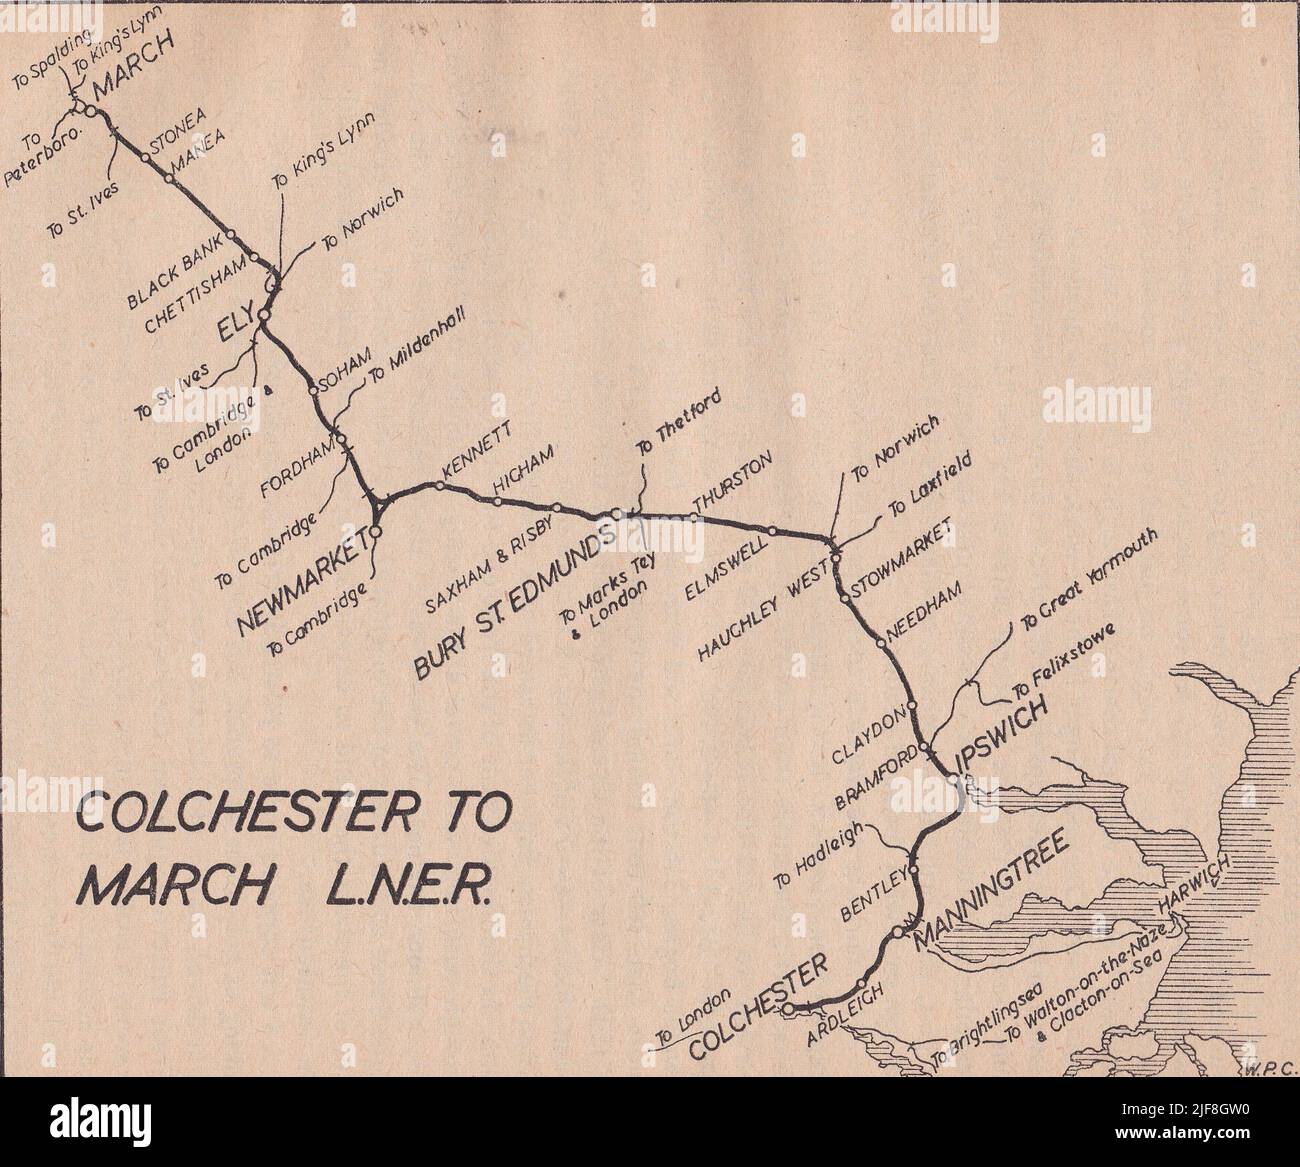 Vintage railway map - Colchester to March L.N.E.R. Stock Photo